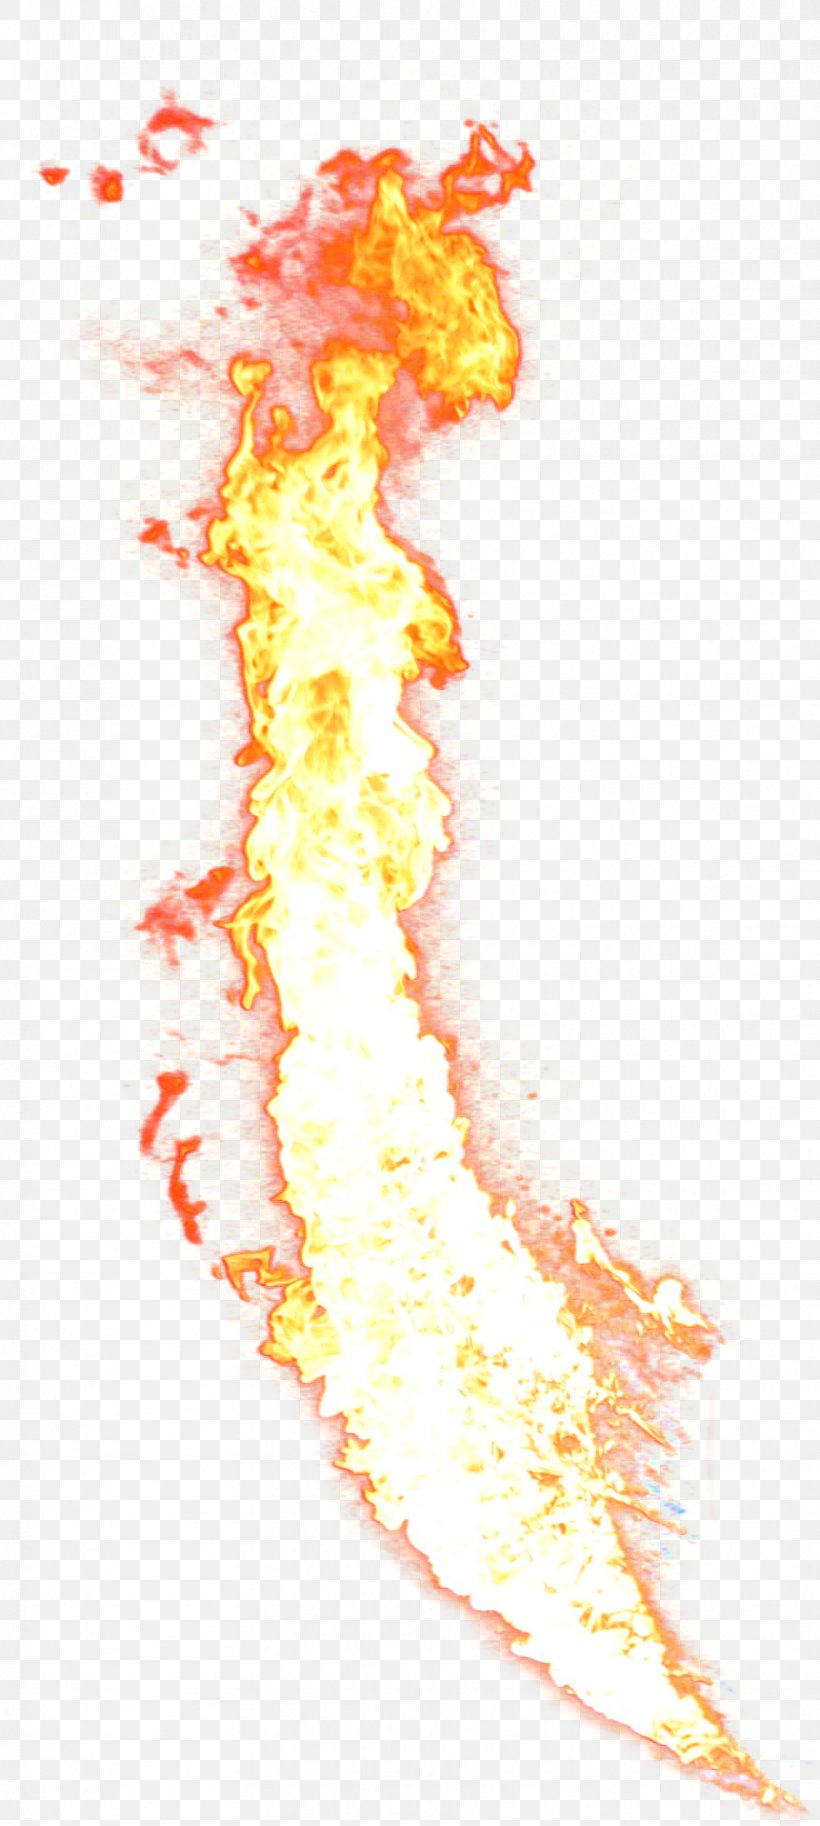 Flame Combustion Fire Euclidean Vector, PNG, 879x1958px, Flame, Art, Combustion, Designer, Fire Download Free